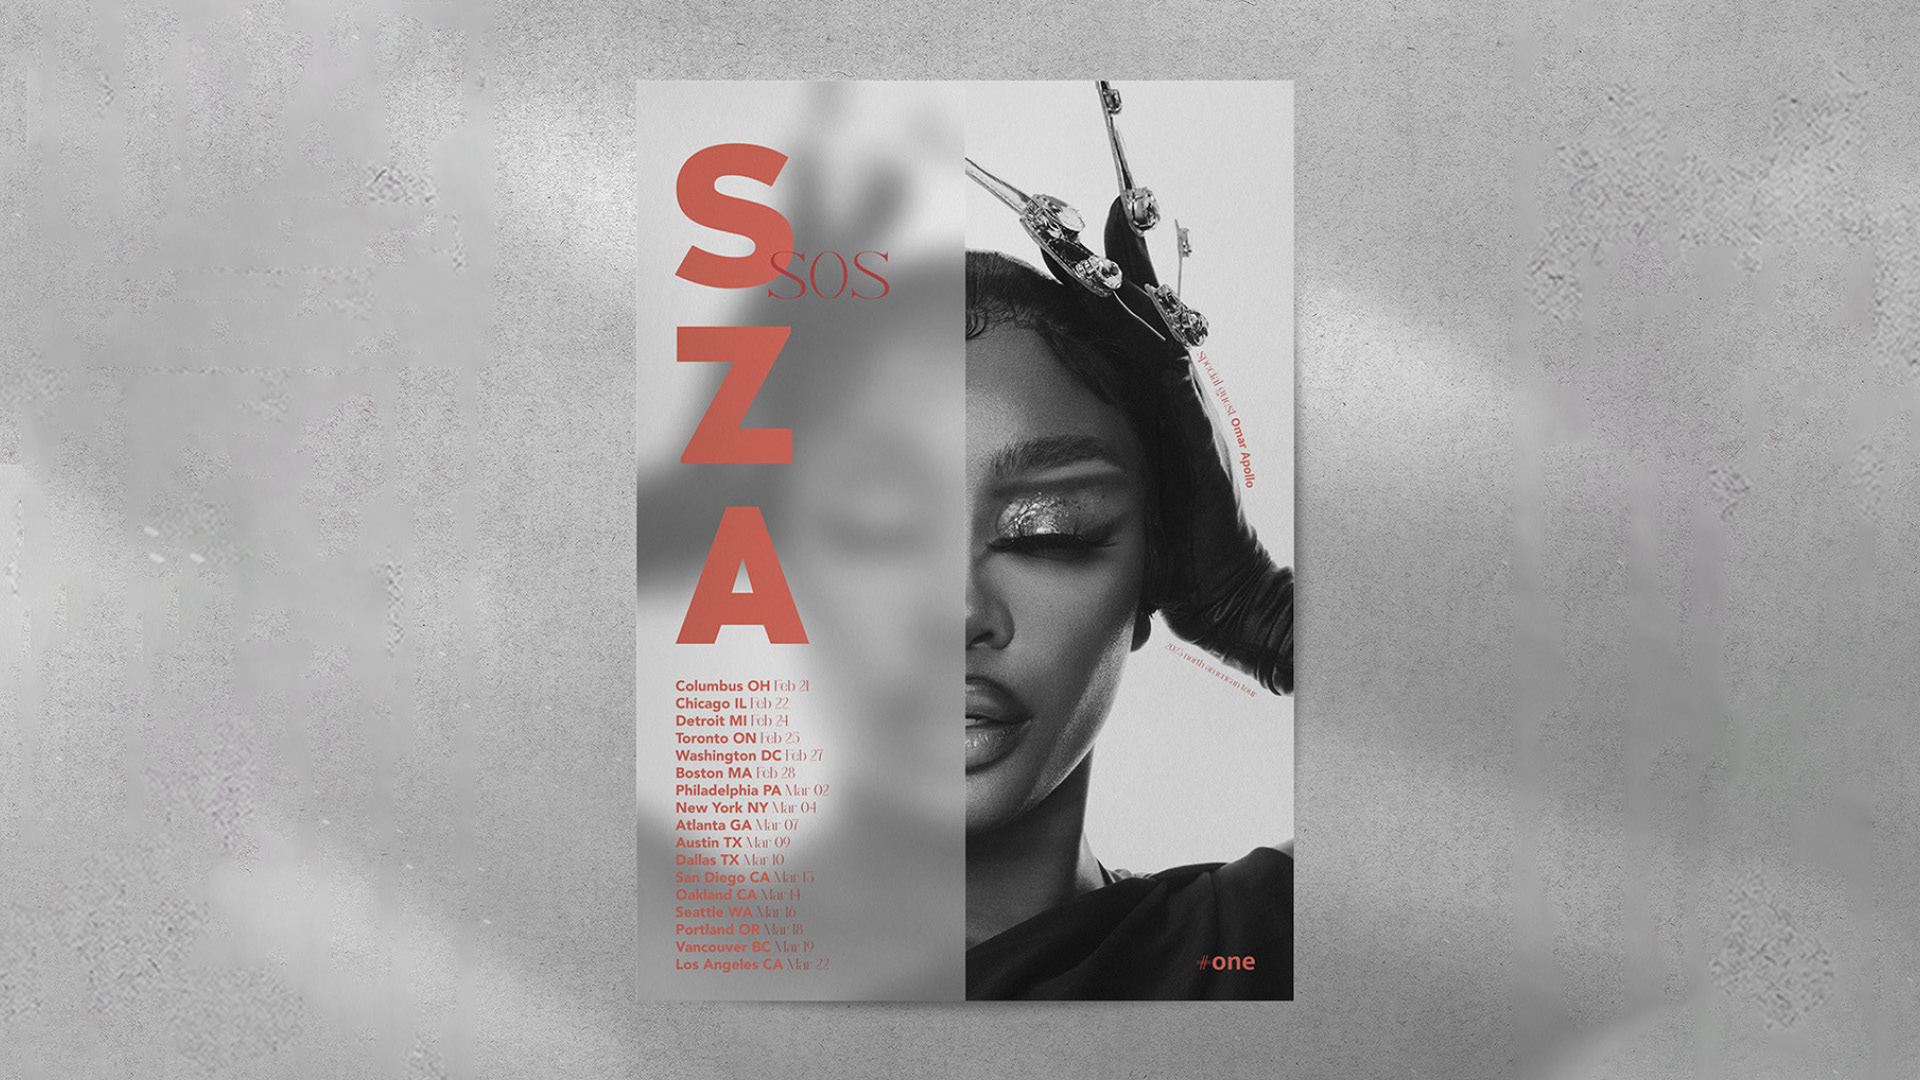 SZA / SZA, SZA 2023 Tour Poster Design, 18x24 inches print ad, 2023. This introduces SZA‚ 2023 North American Tour dates and locations.